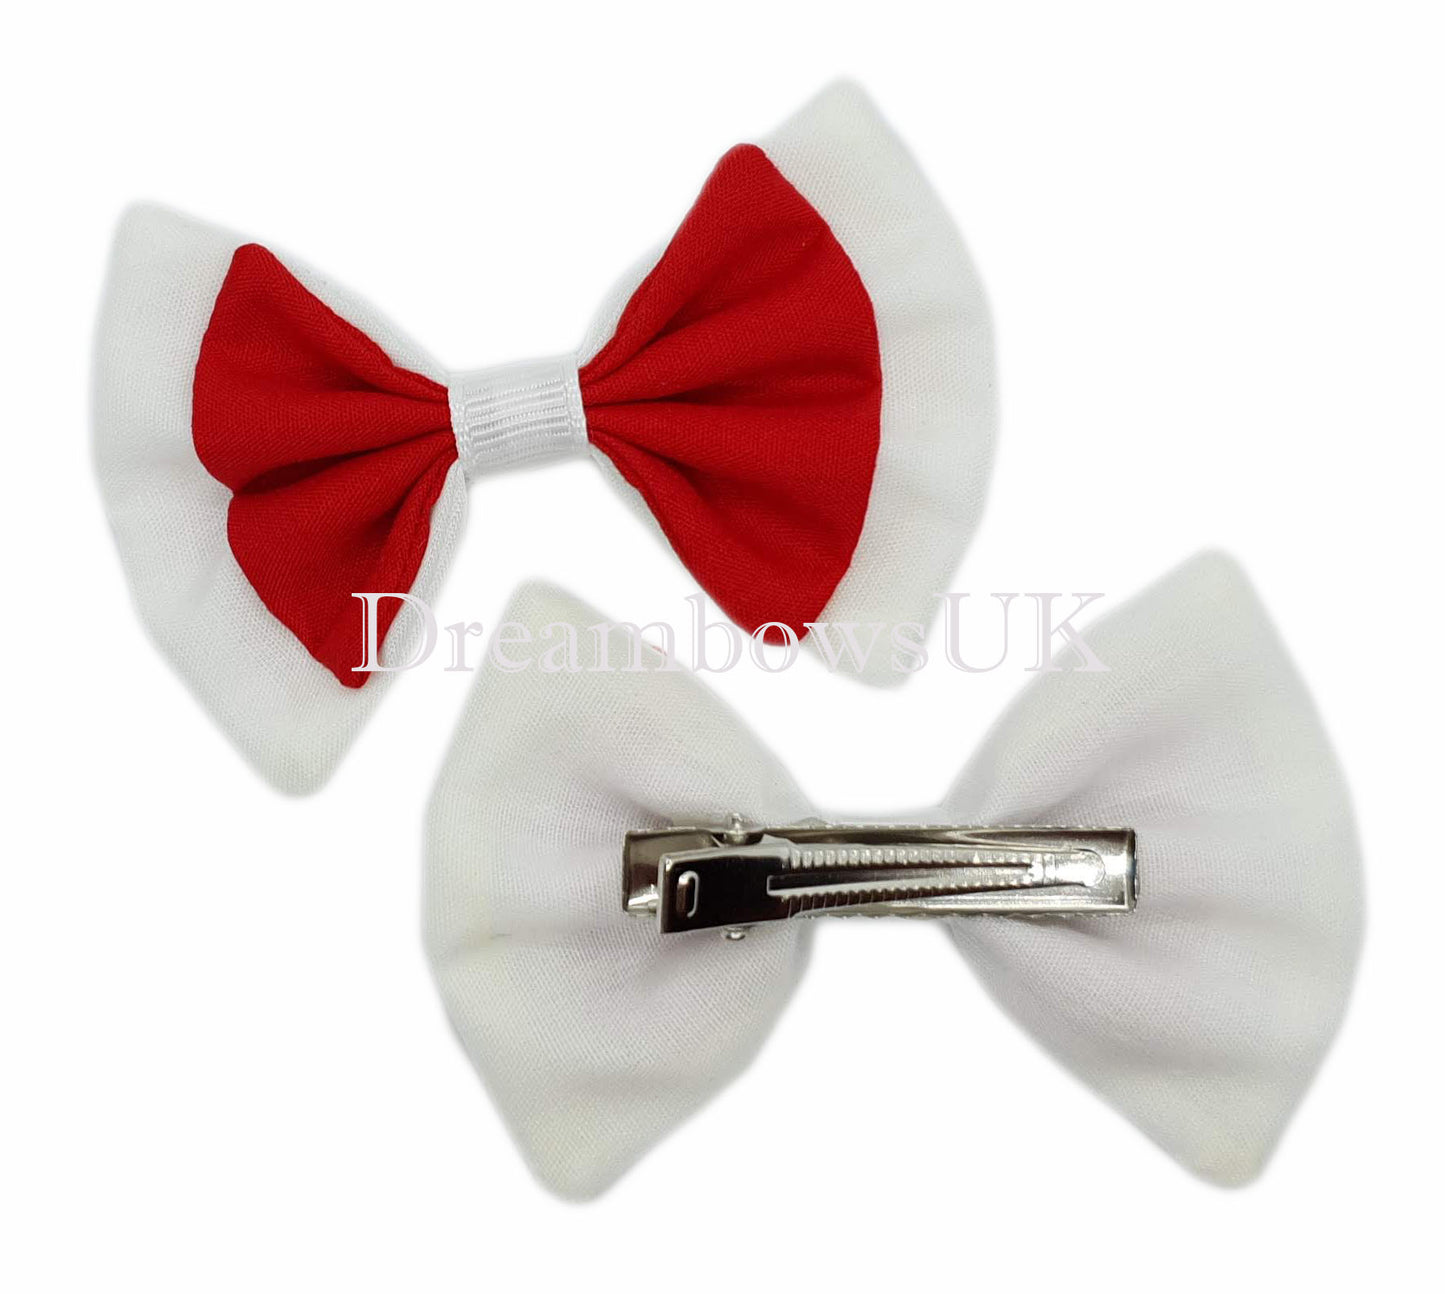 2x Red and white fabric hair bows